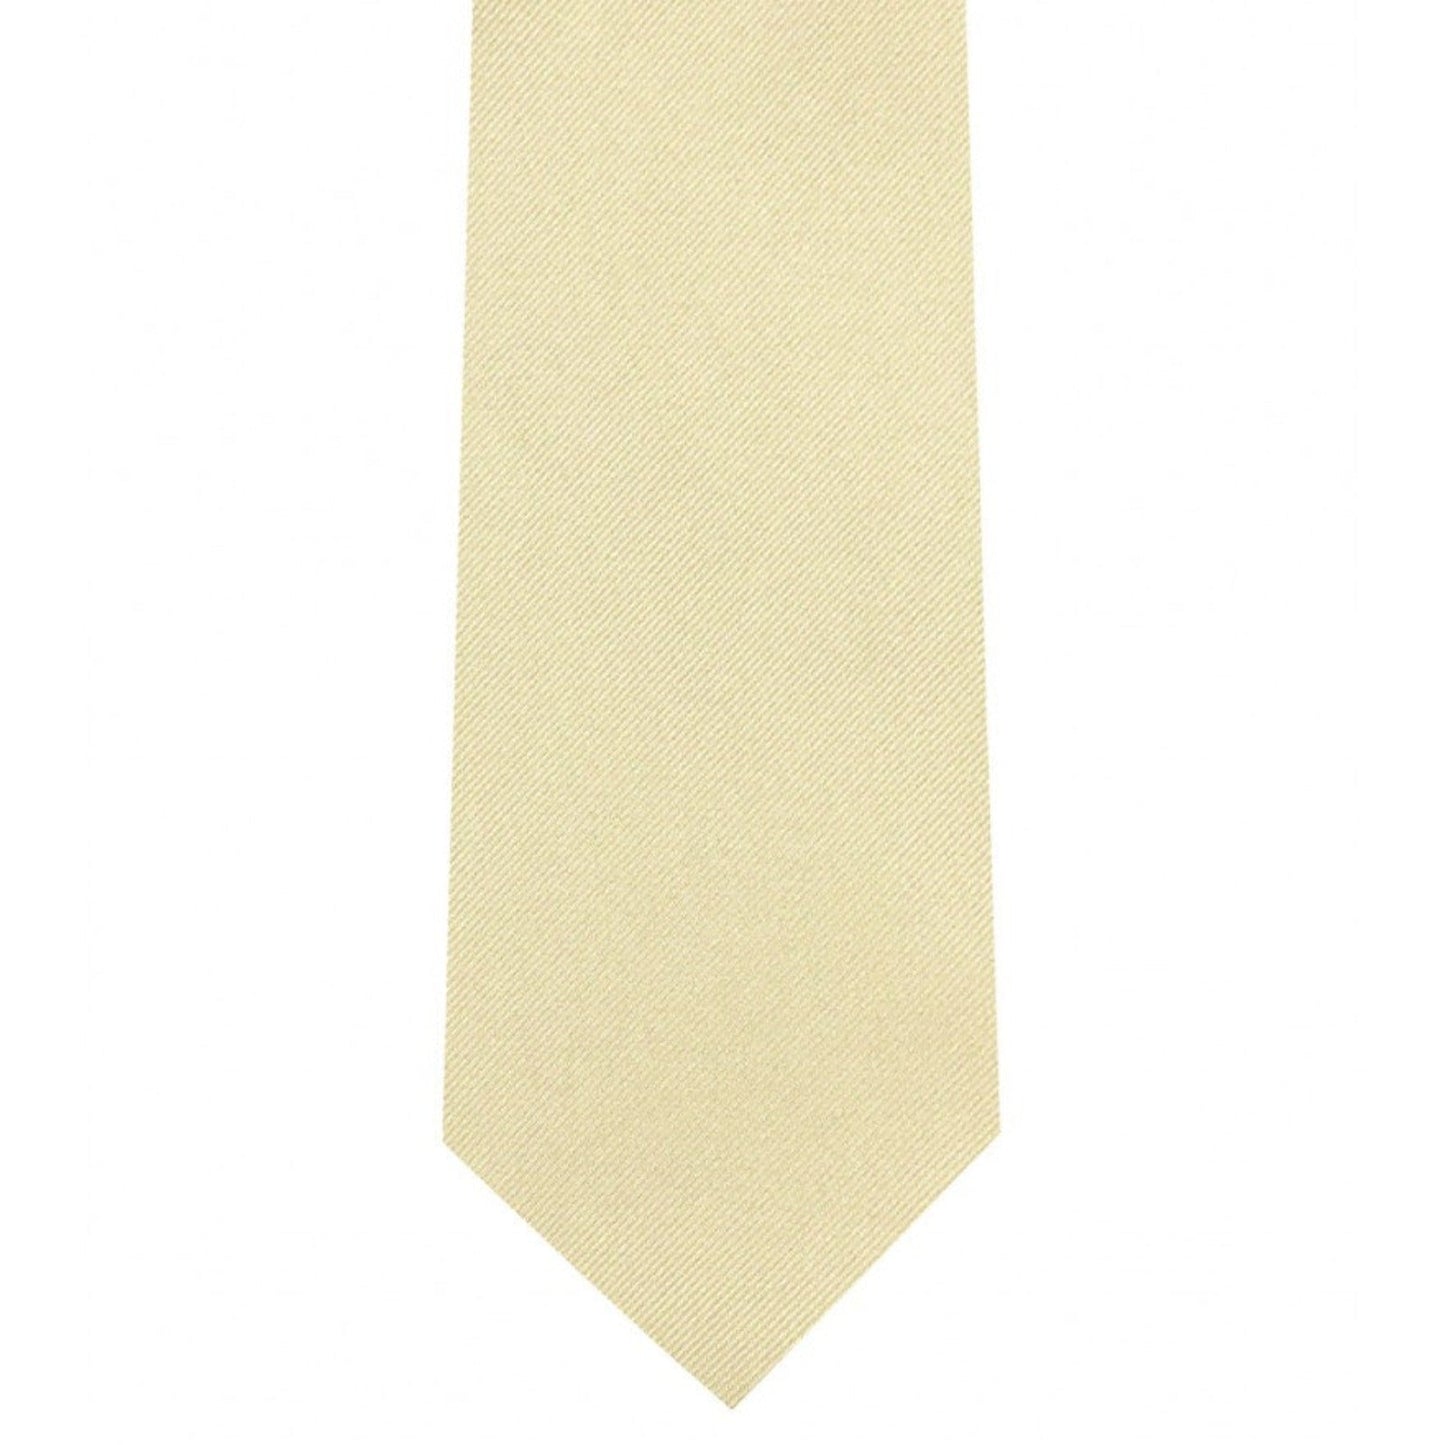 Classic Champagne Tie Ultra Skinny tie width 2.25 inches With Matching Pocket Square | KCT Menswear